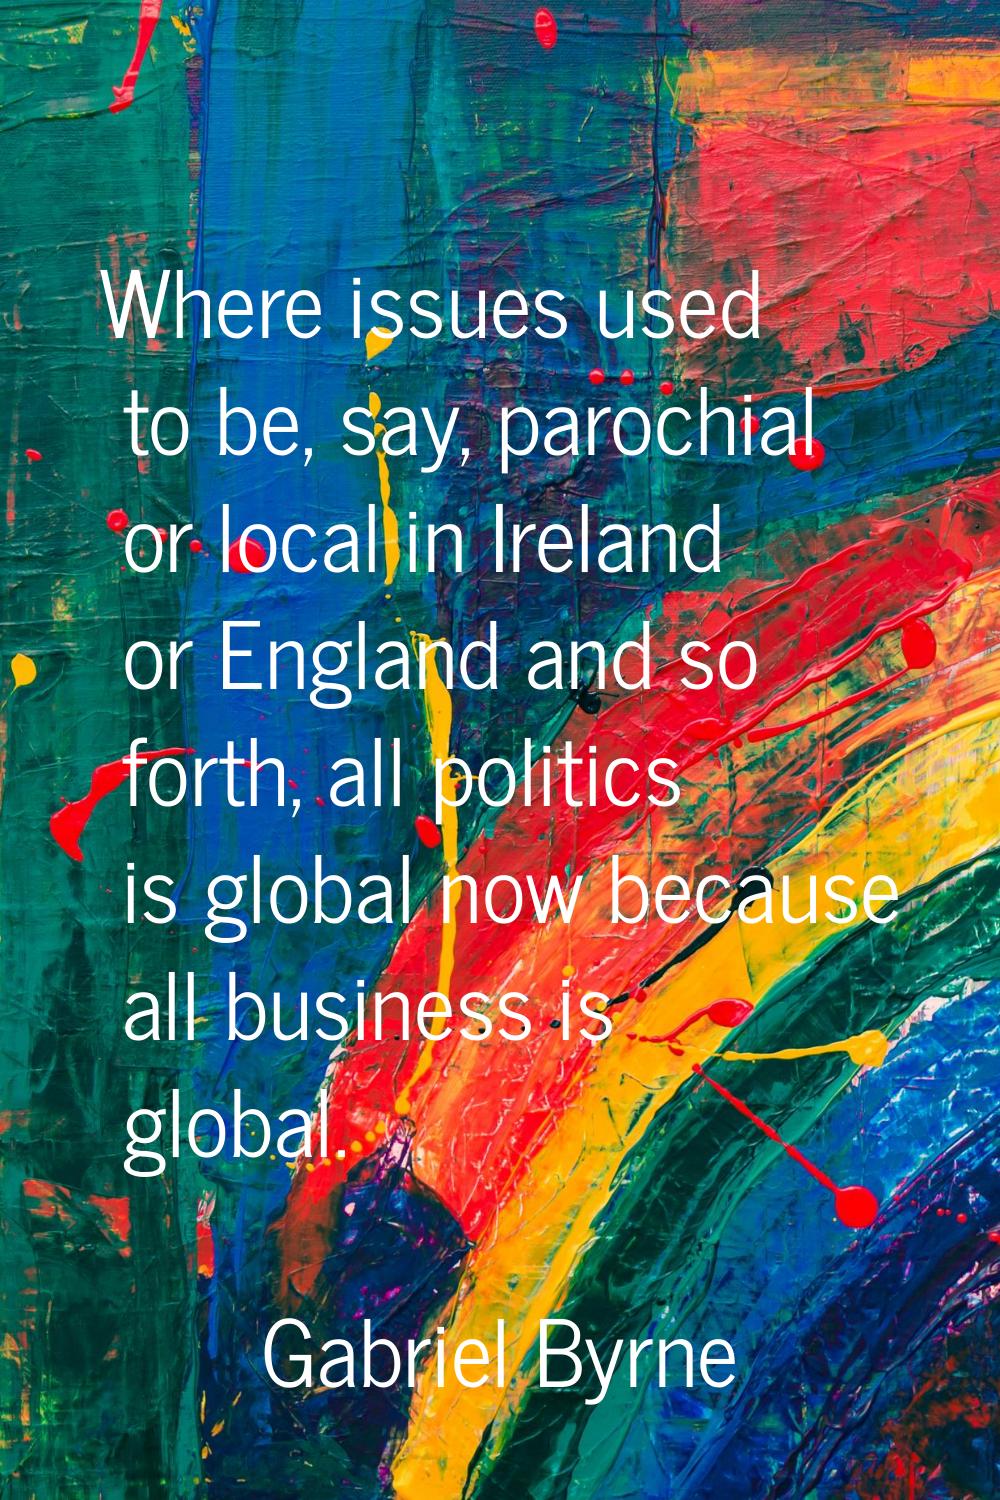 Where issues used to be, say, parochial or local in Ireland or England and so forth, all politics i